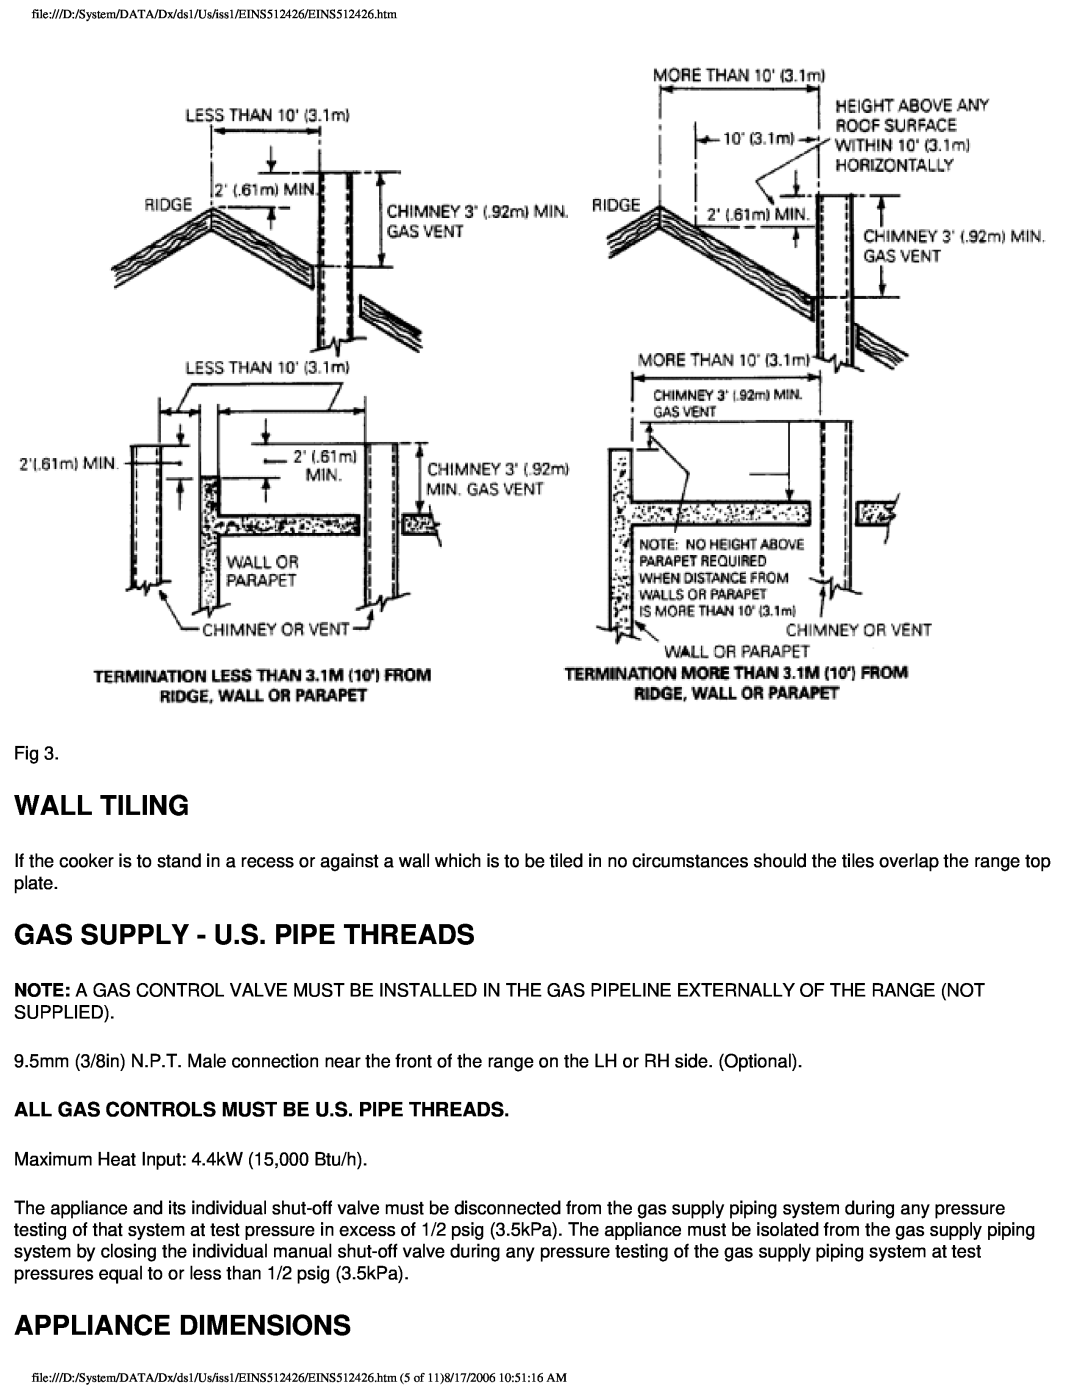 Aga Ranges GC 3 installation instructions Wall Tiling, Gas Supply - U.S. Pipe Threads, Appliance Dimensions 